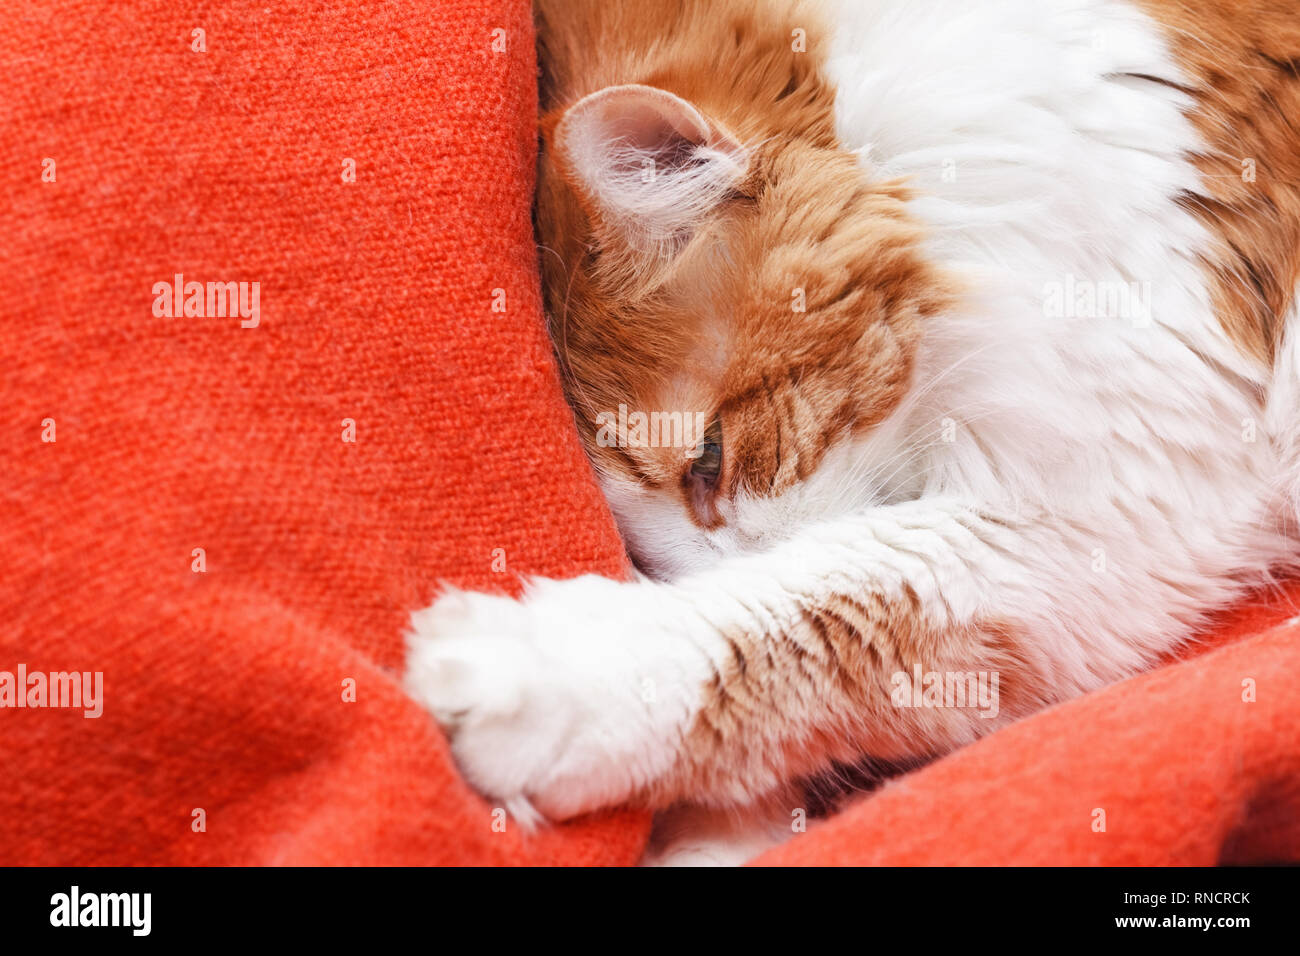 Pretty adult red cat buried in orange blanket Stock Photo